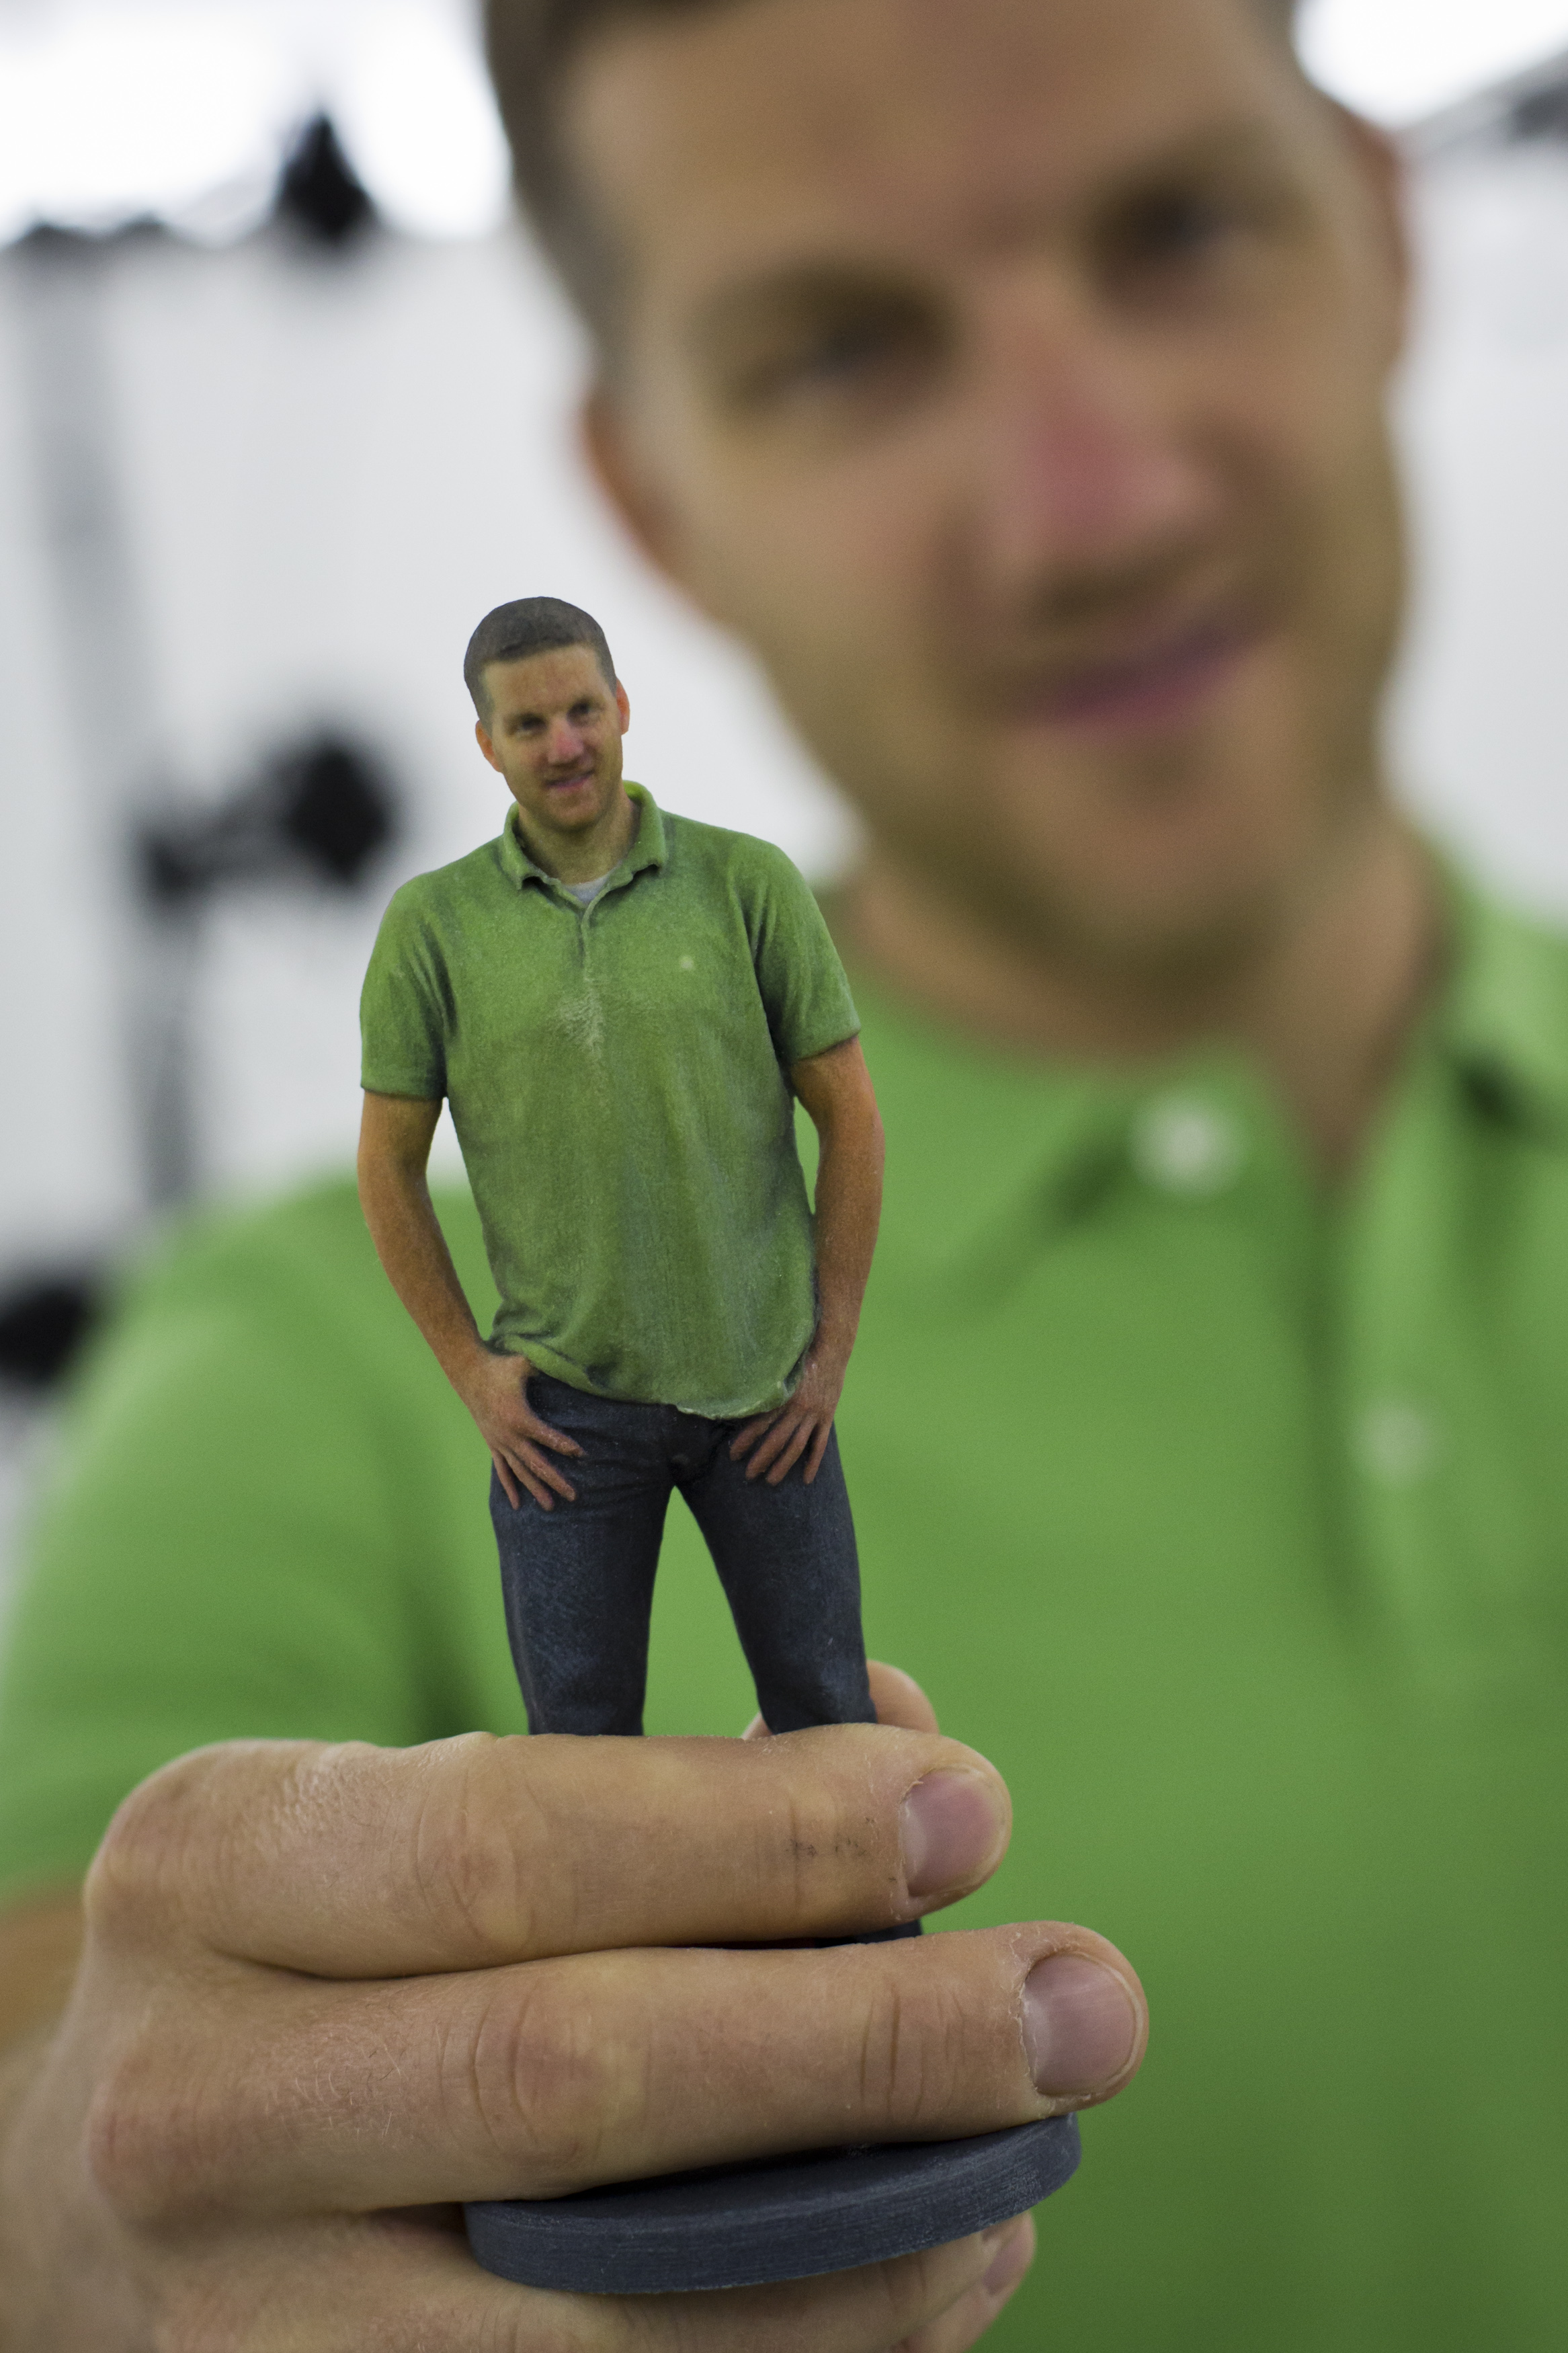 Martin Benes from 3D gang company holds a printed figurine of himself on August 26, 2014 in Prague, Czech Republic.